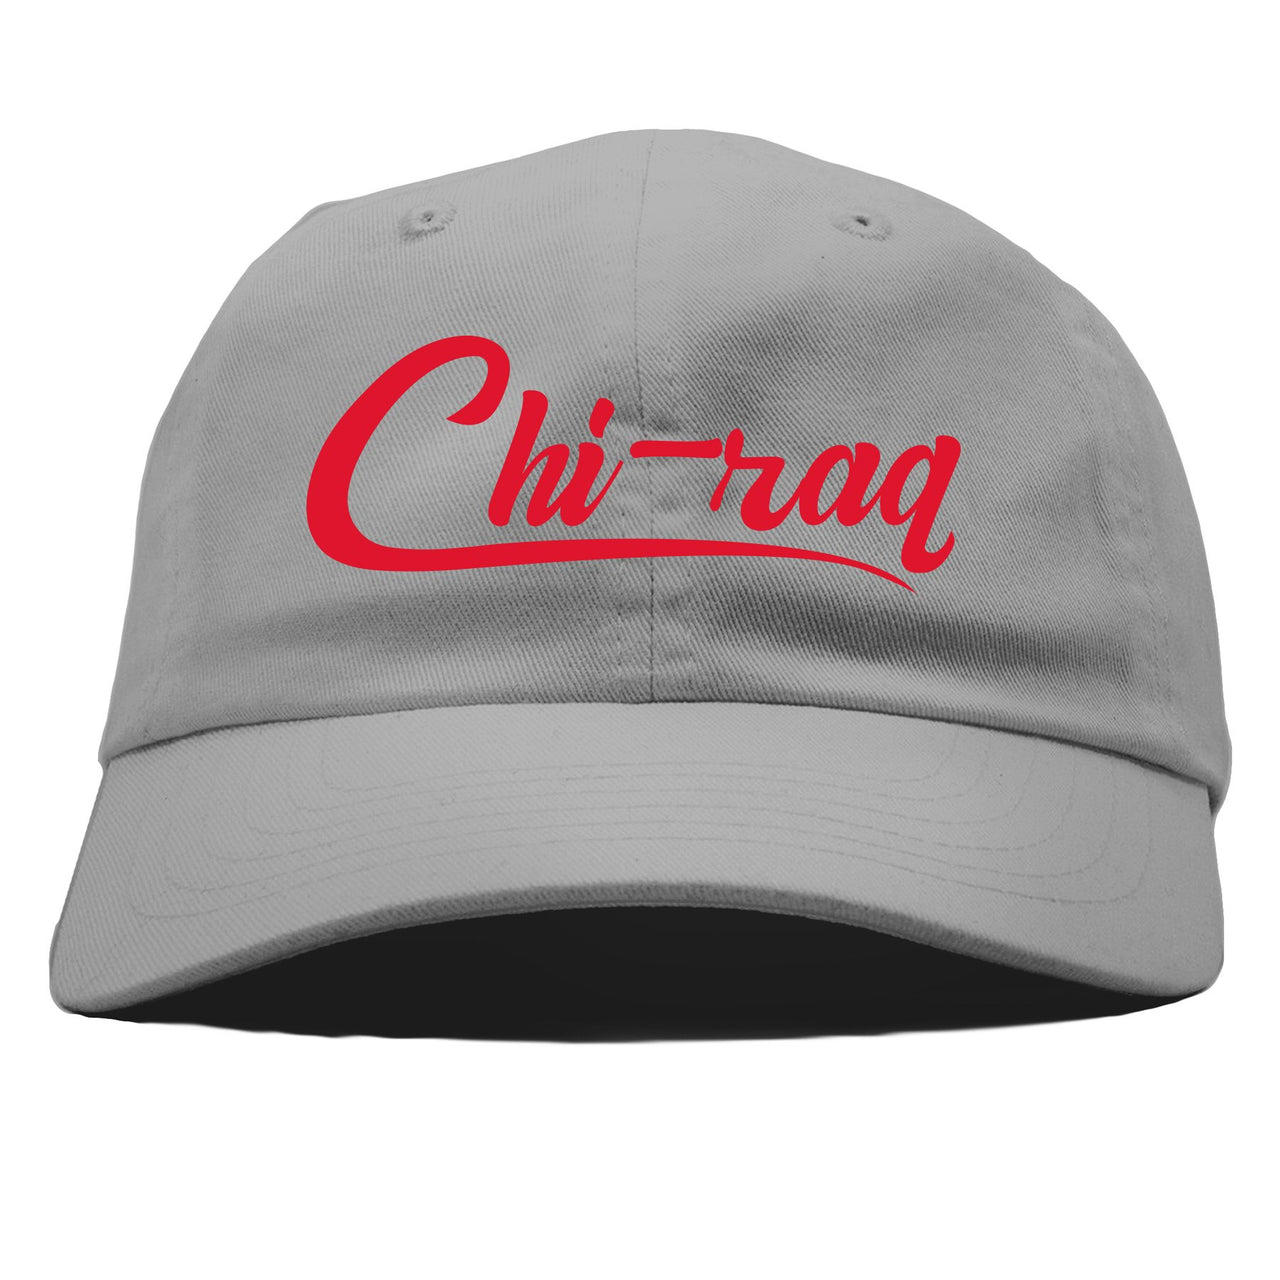 Reflections of a Champion 8s Dad Hat | Chiraq Script, Gray